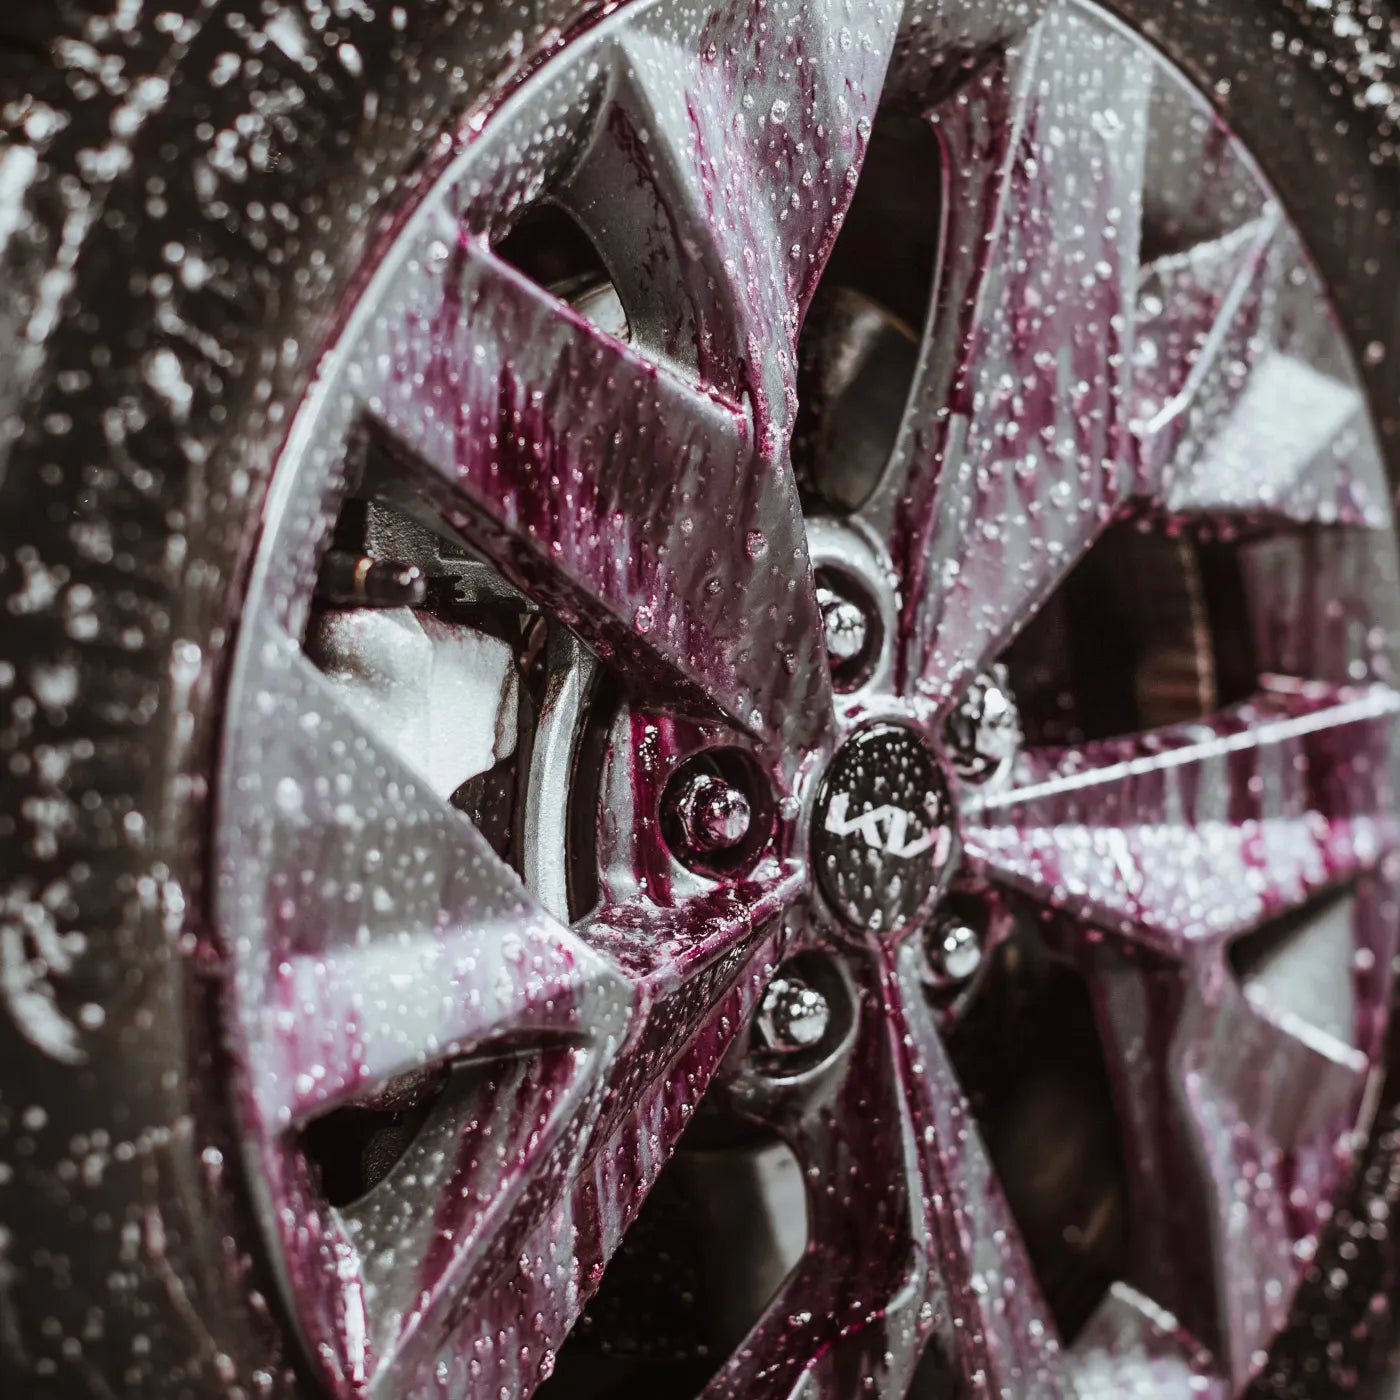 Autoglym Wheel Cleaner like Magma. An ultimate wheel cleaner that safely cuts through road grime? It’s time you reached for a bottle of our colour changing, high-cling, pH neutral Advanced All Wheel Cleaner. Autoglym Ireland